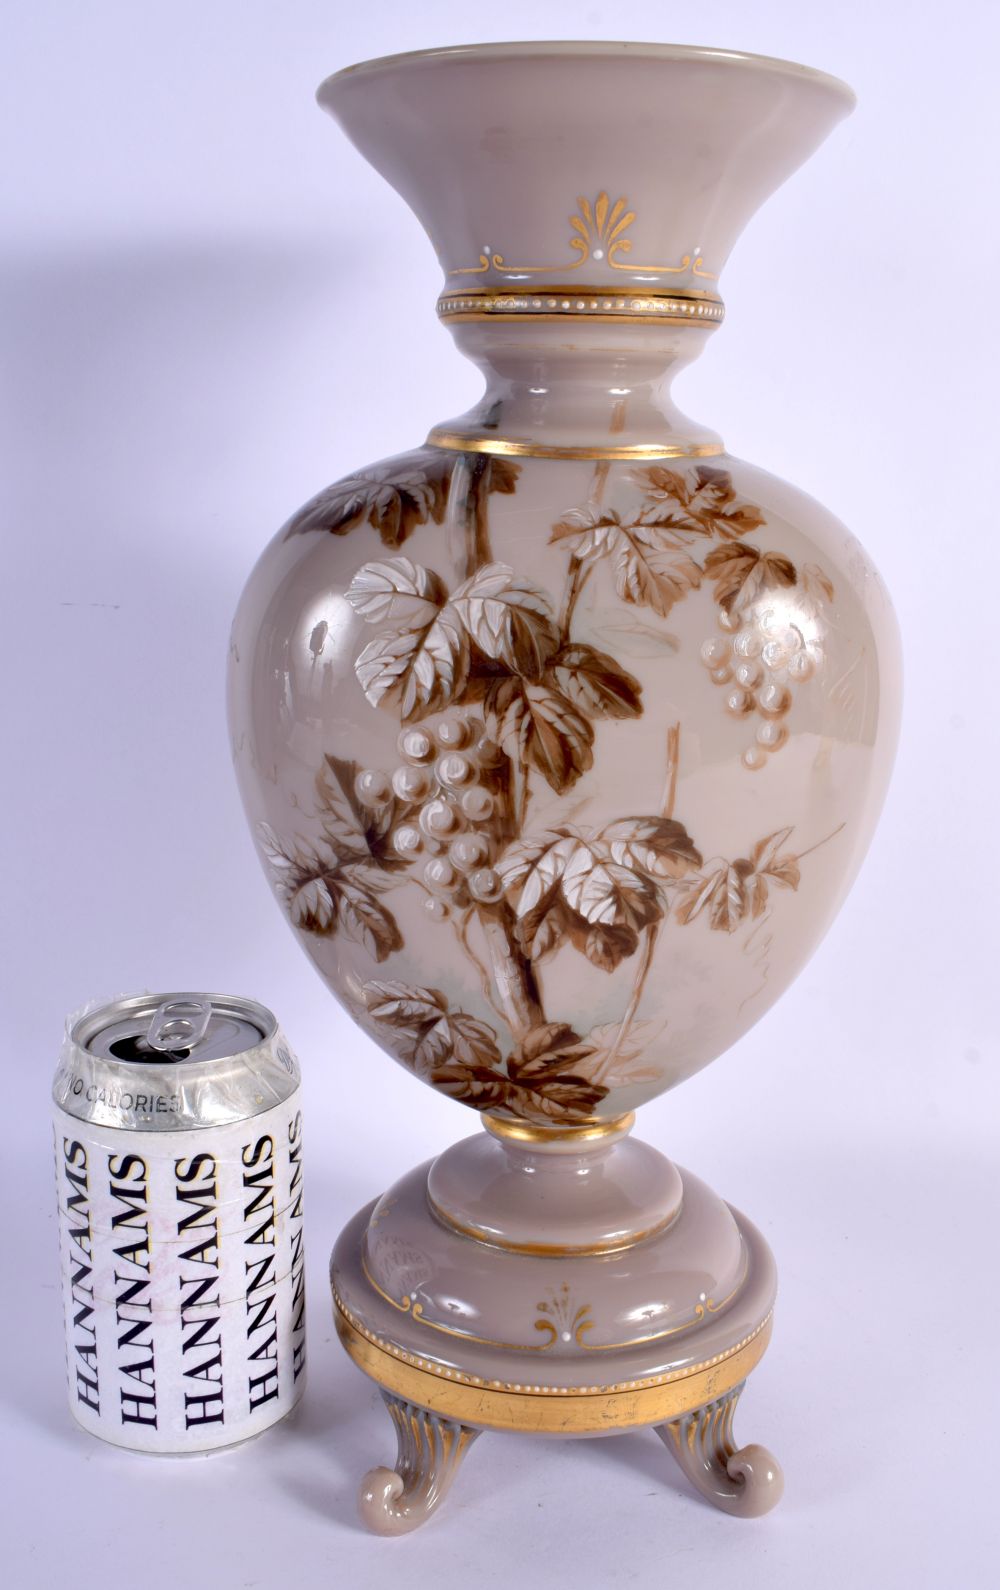 A LARGE LATE VICTORIAN OPALINE GLASS VASE painted with berries and leaves. 36 cm x 15 cm.